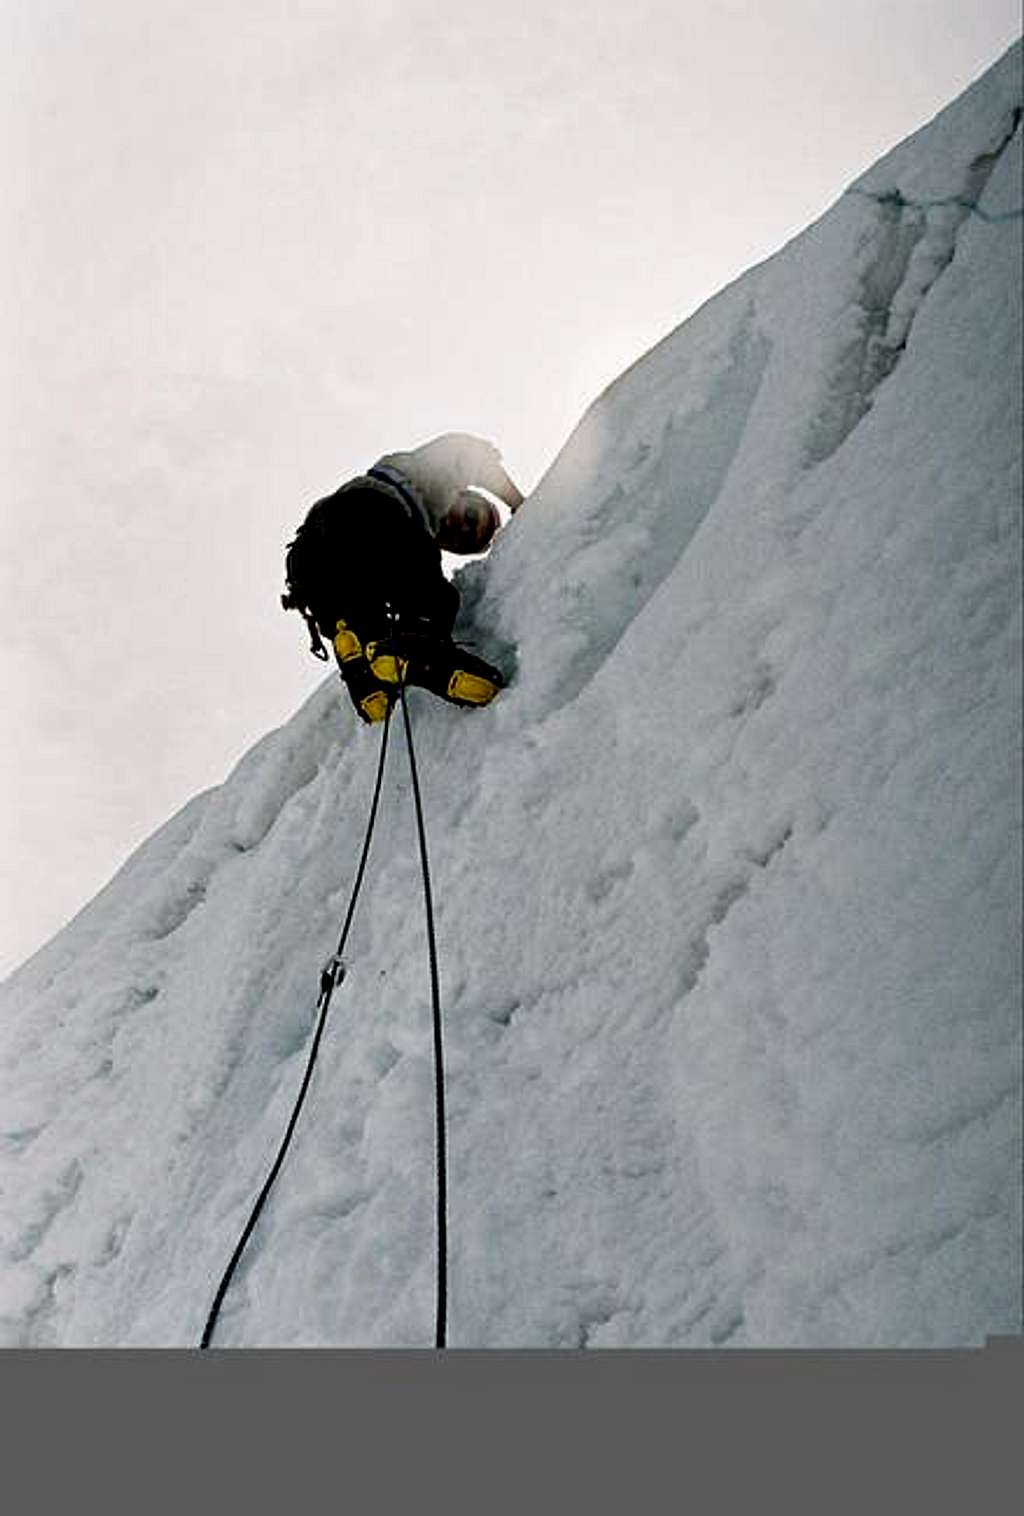 Nick tooling up 30 foot pitch...